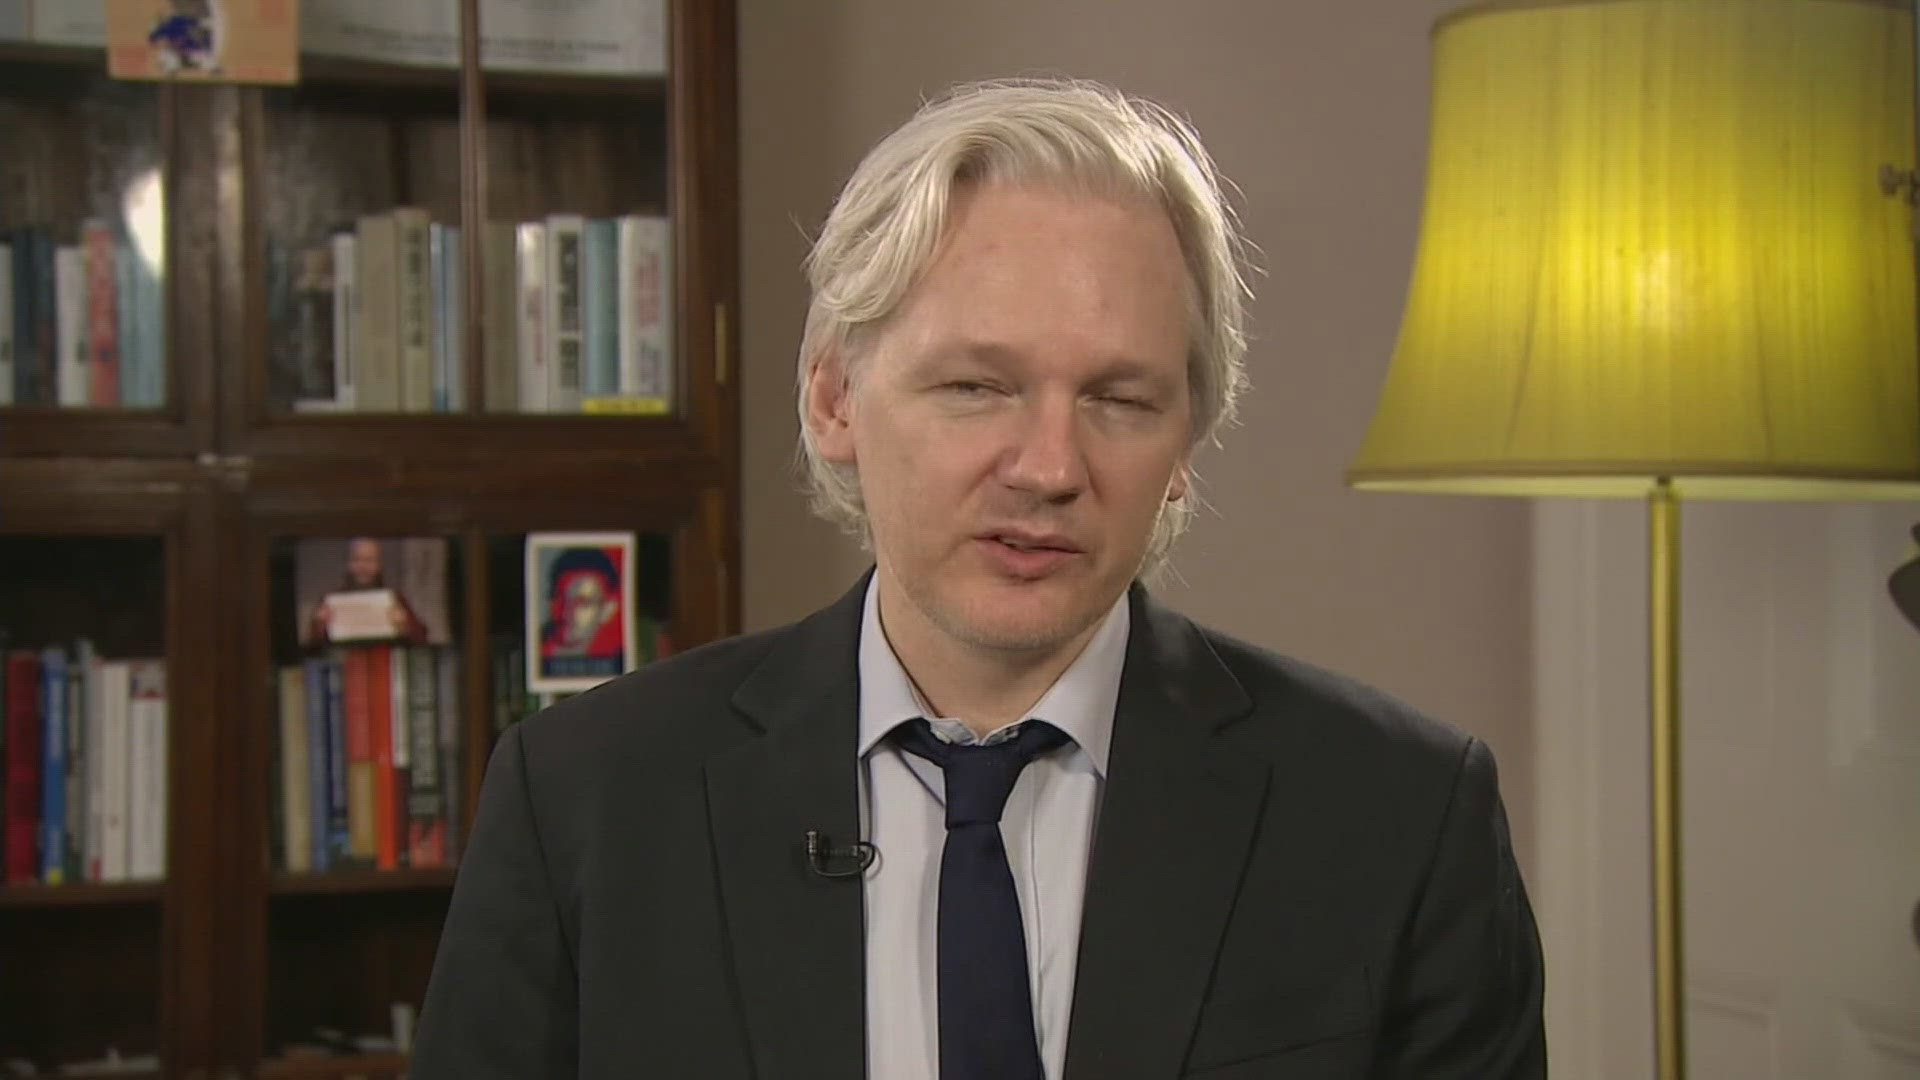 Assange is scheduled to appear in the federal court in the Mariana Islands, a U.S. commonwealth in the Western Pacific, to plead guilty to an Espionage Act charge.